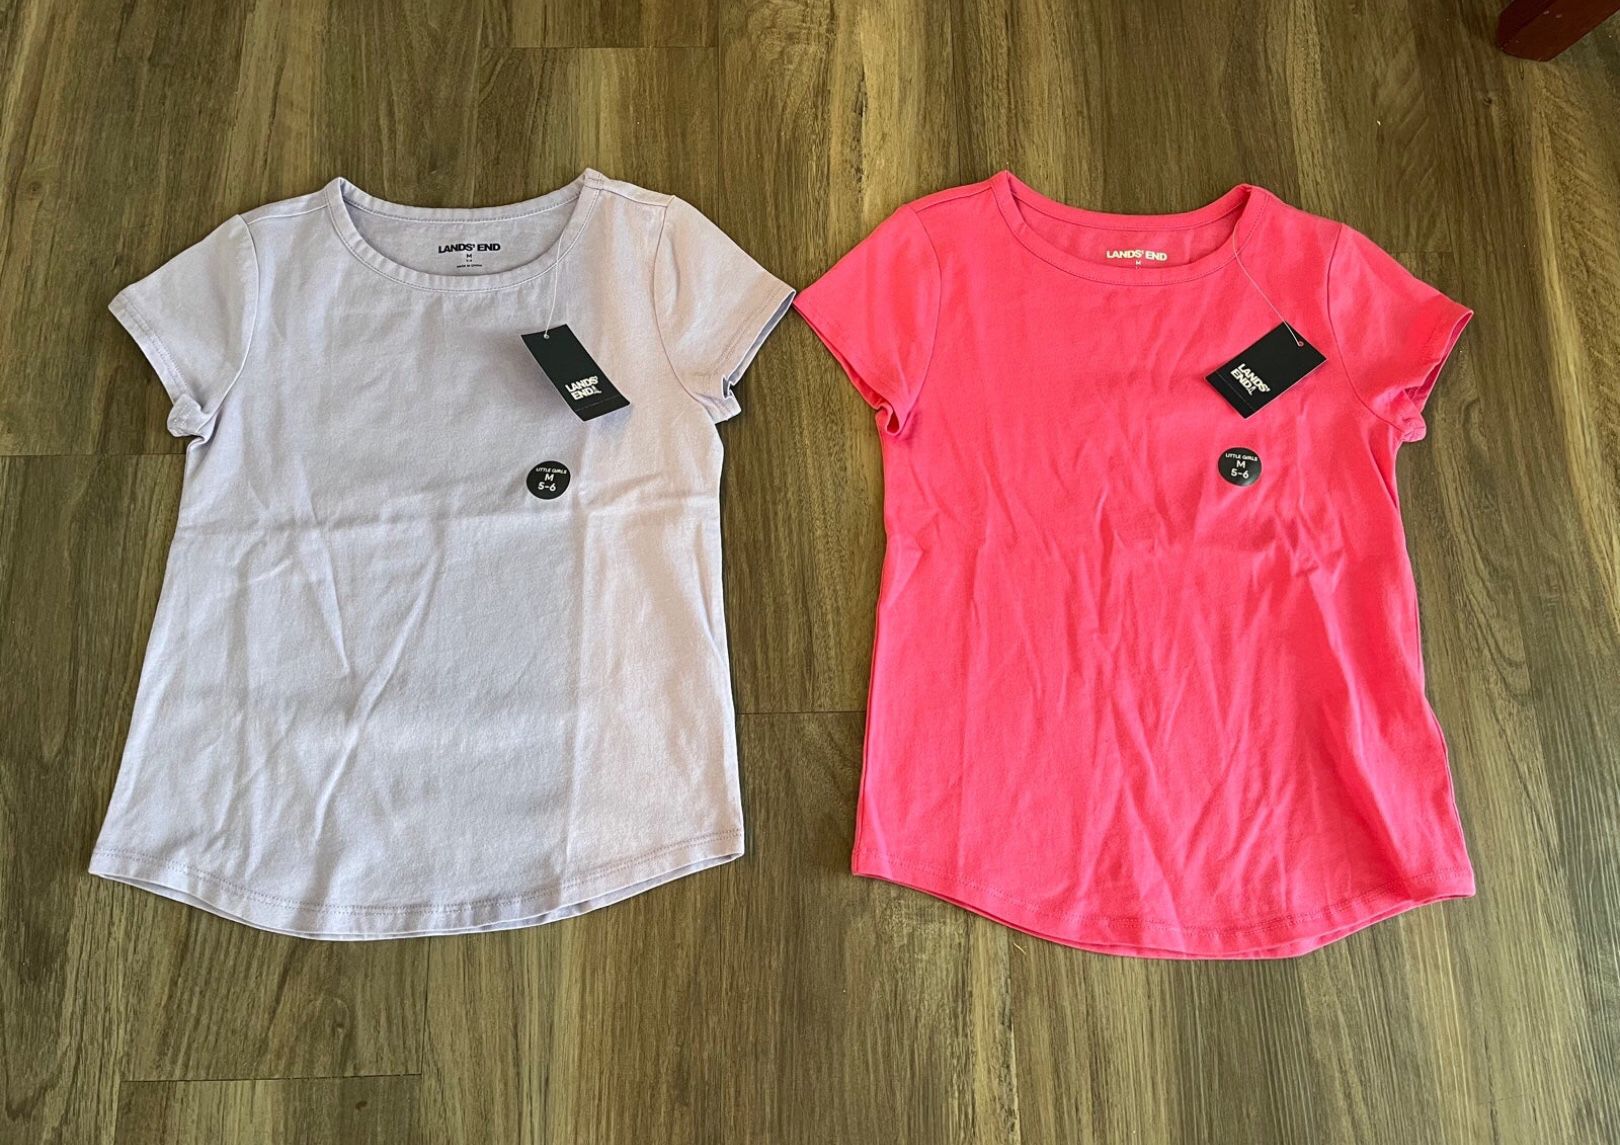 New - Lands End girl’s shirts, sizes 5-6/M